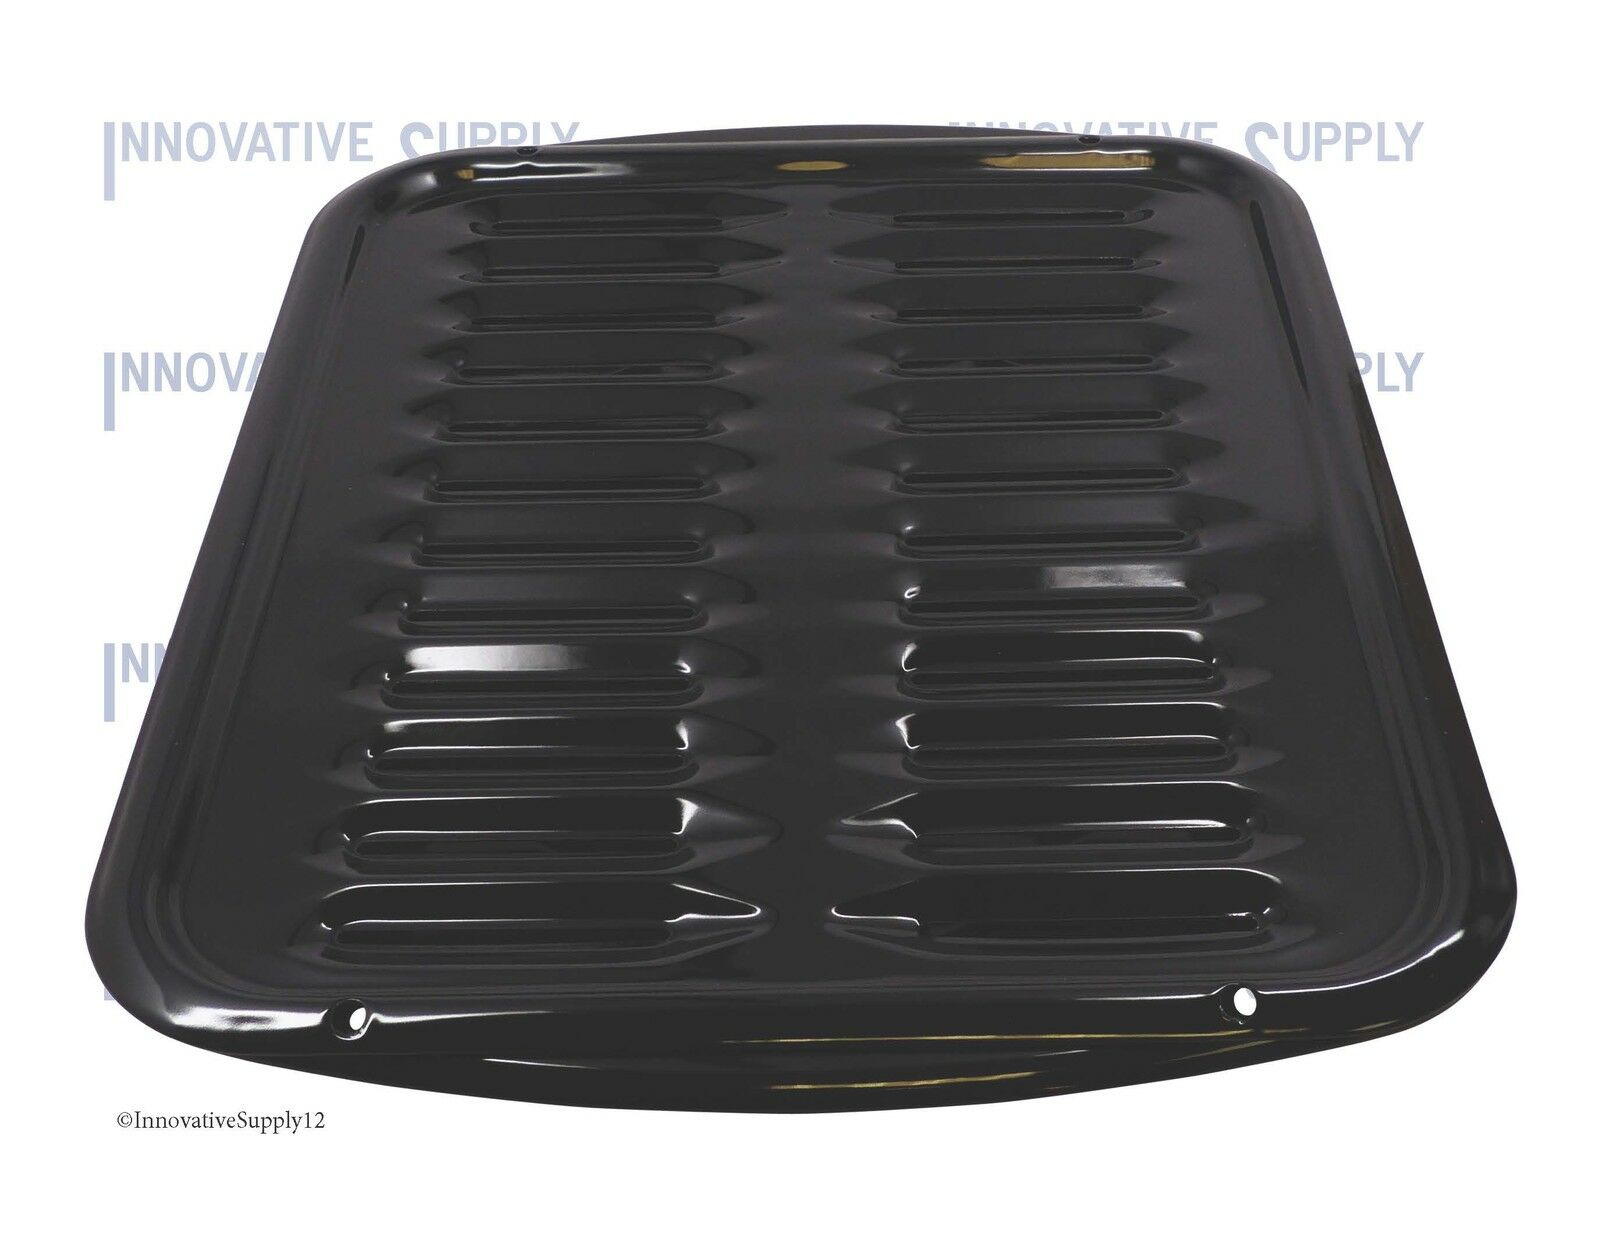 4396923,4396923rw Porcelain Broiler Pan W/ Grill - Replacement For Whirlpool